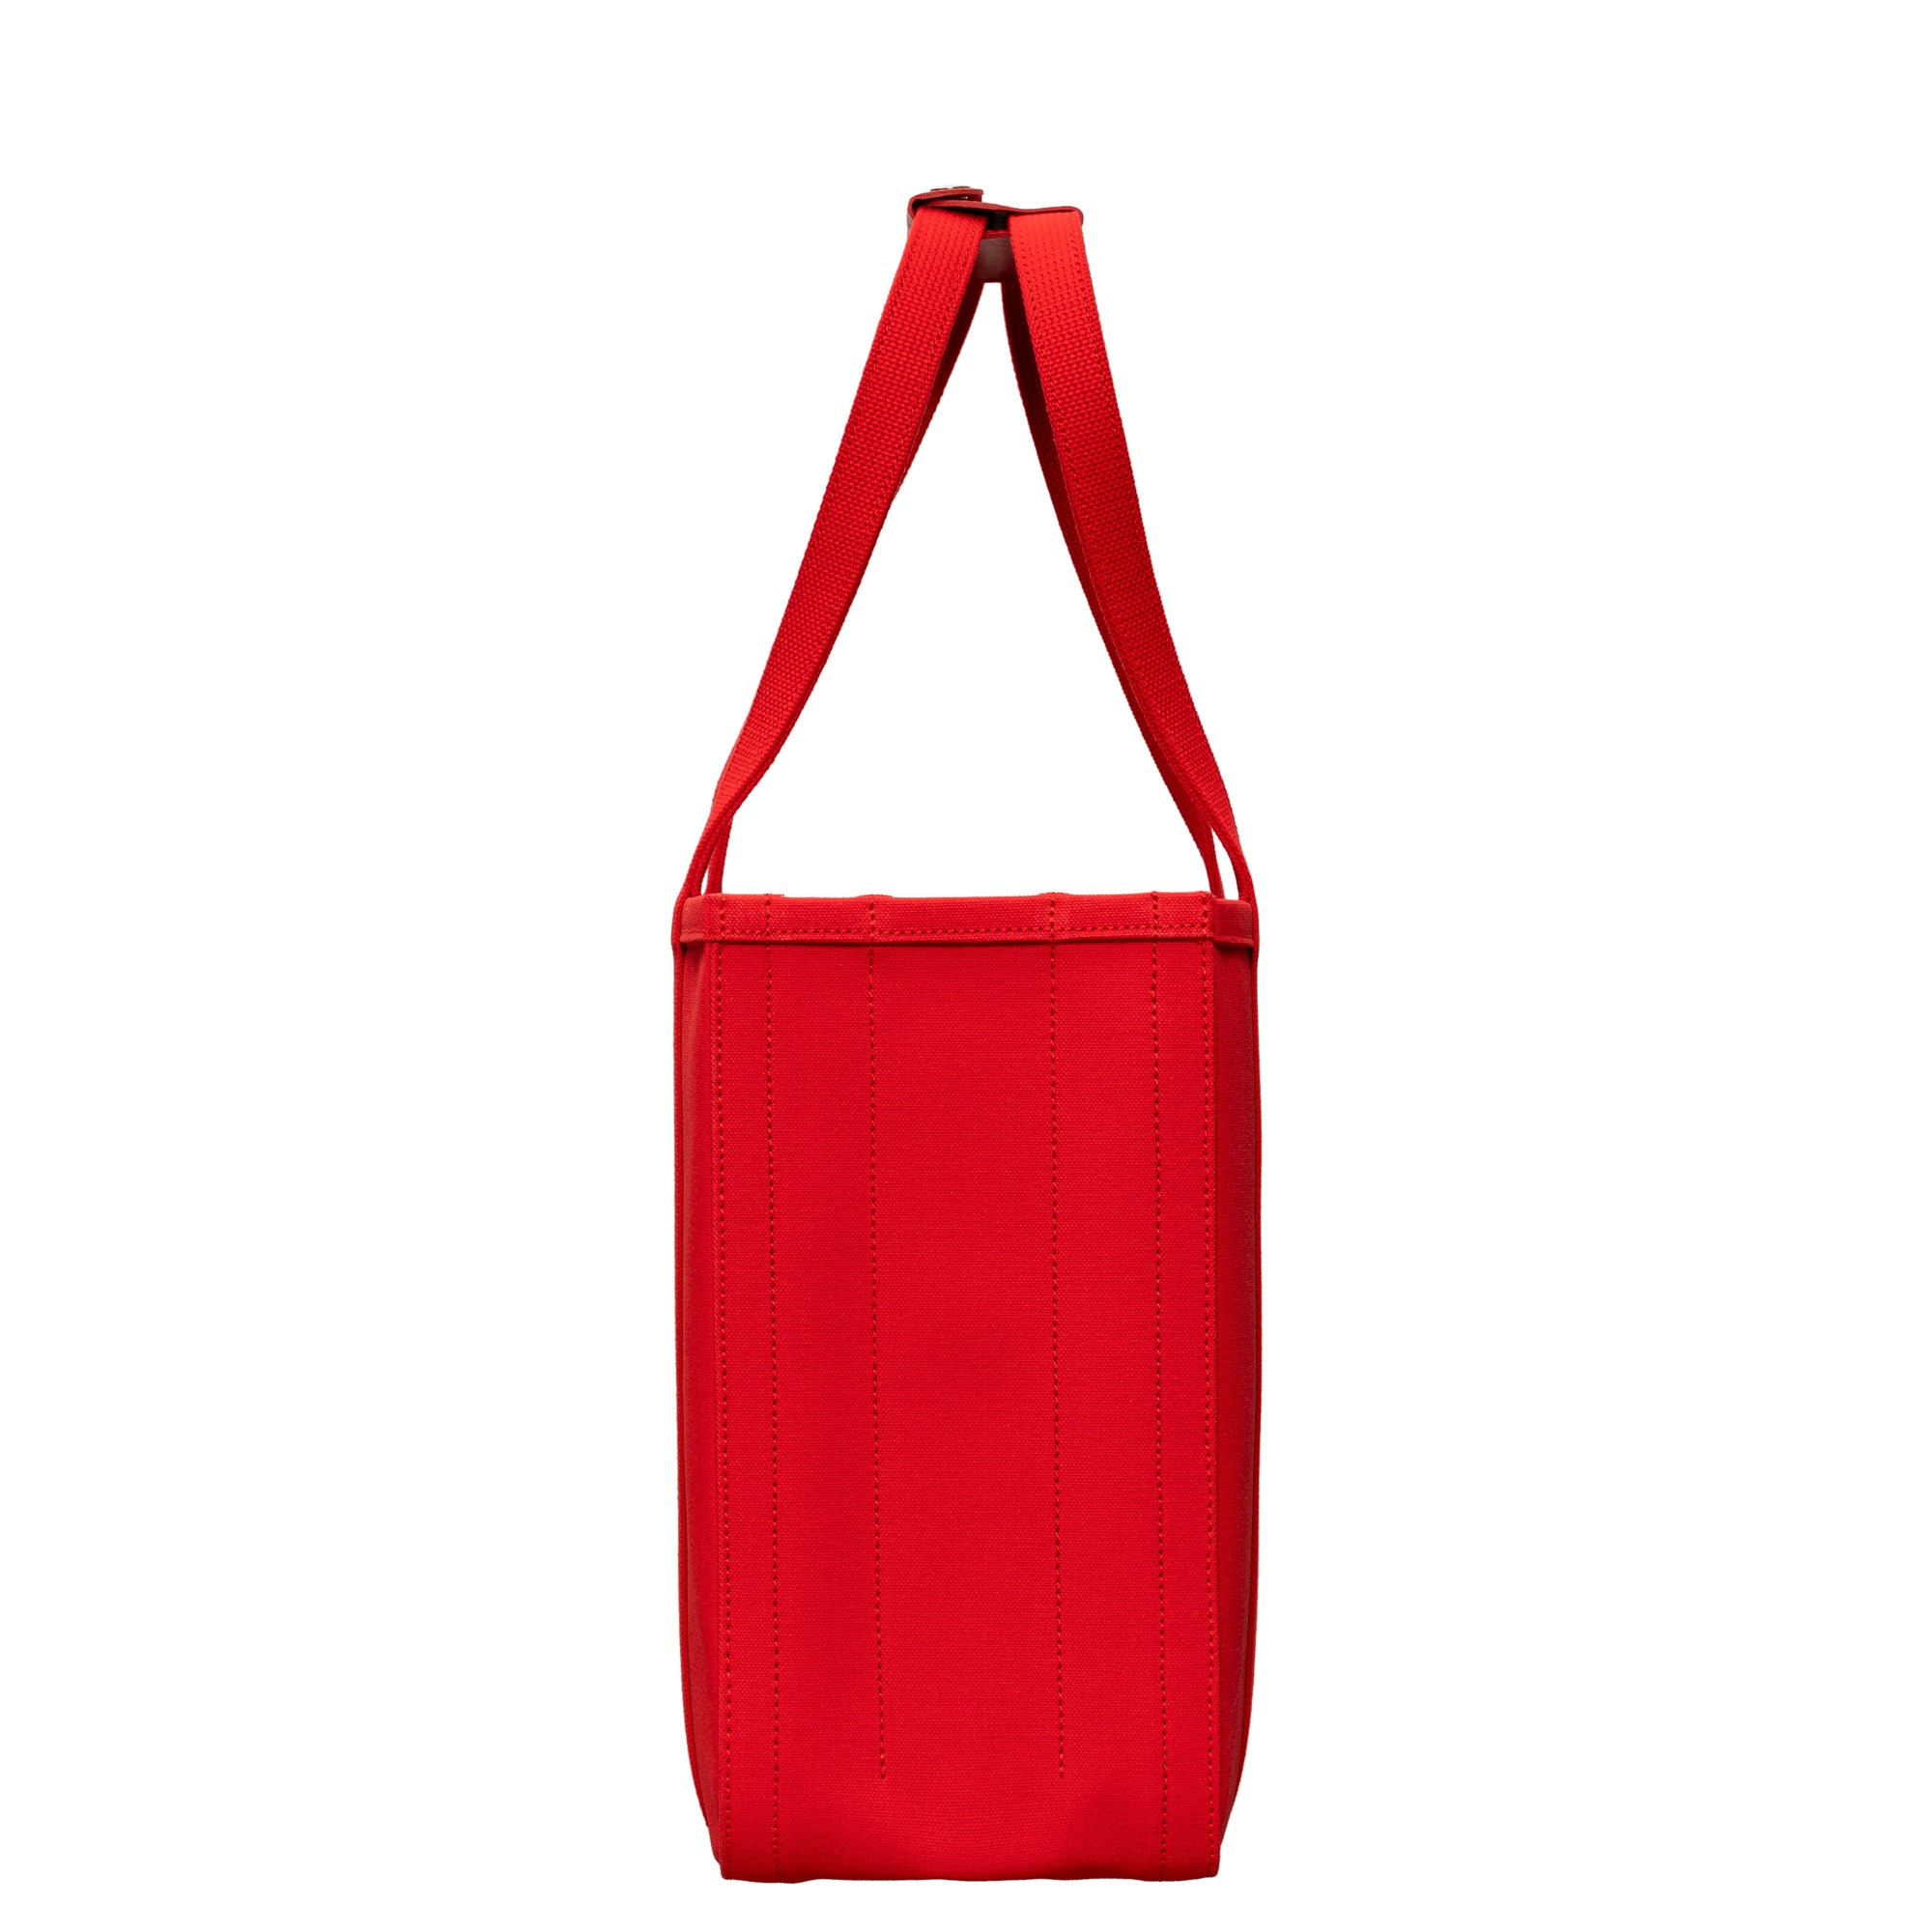 CHACOLI - 02 TOTE W400 X H320 X D180 - (RED) view 2